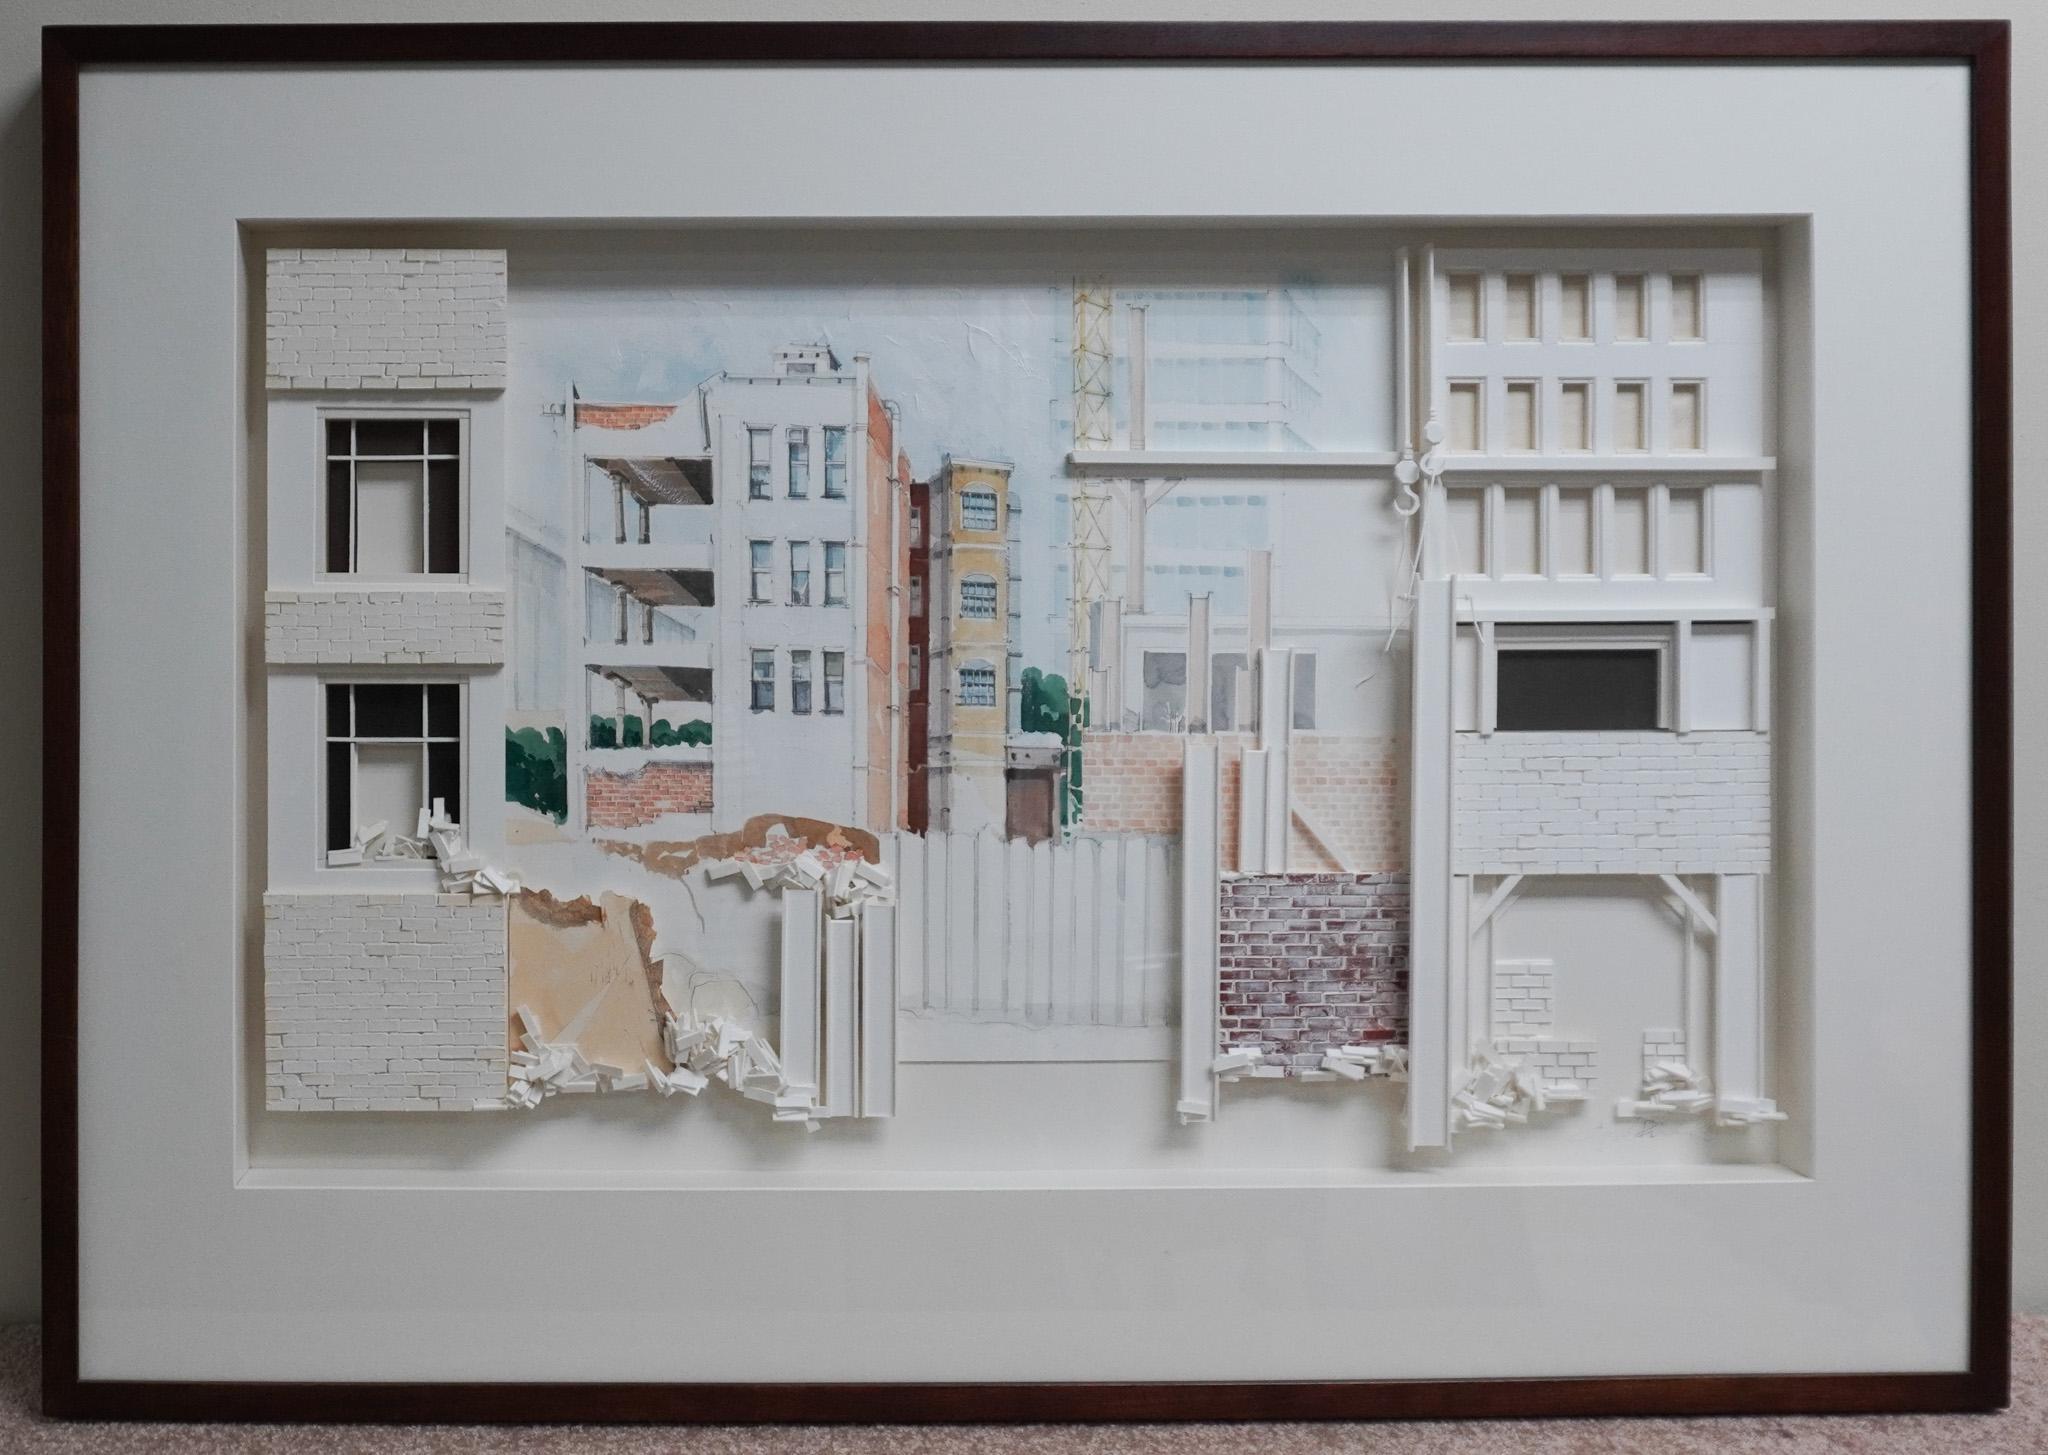 Guenther Riess (Austrian 1945-2015), Under Construction: View Of Washington, DC, hand Signed And Dated 1988, Watercolor And Acrylic Construction.
Medium Drawing, collage or other work on paper. 
Very unique.